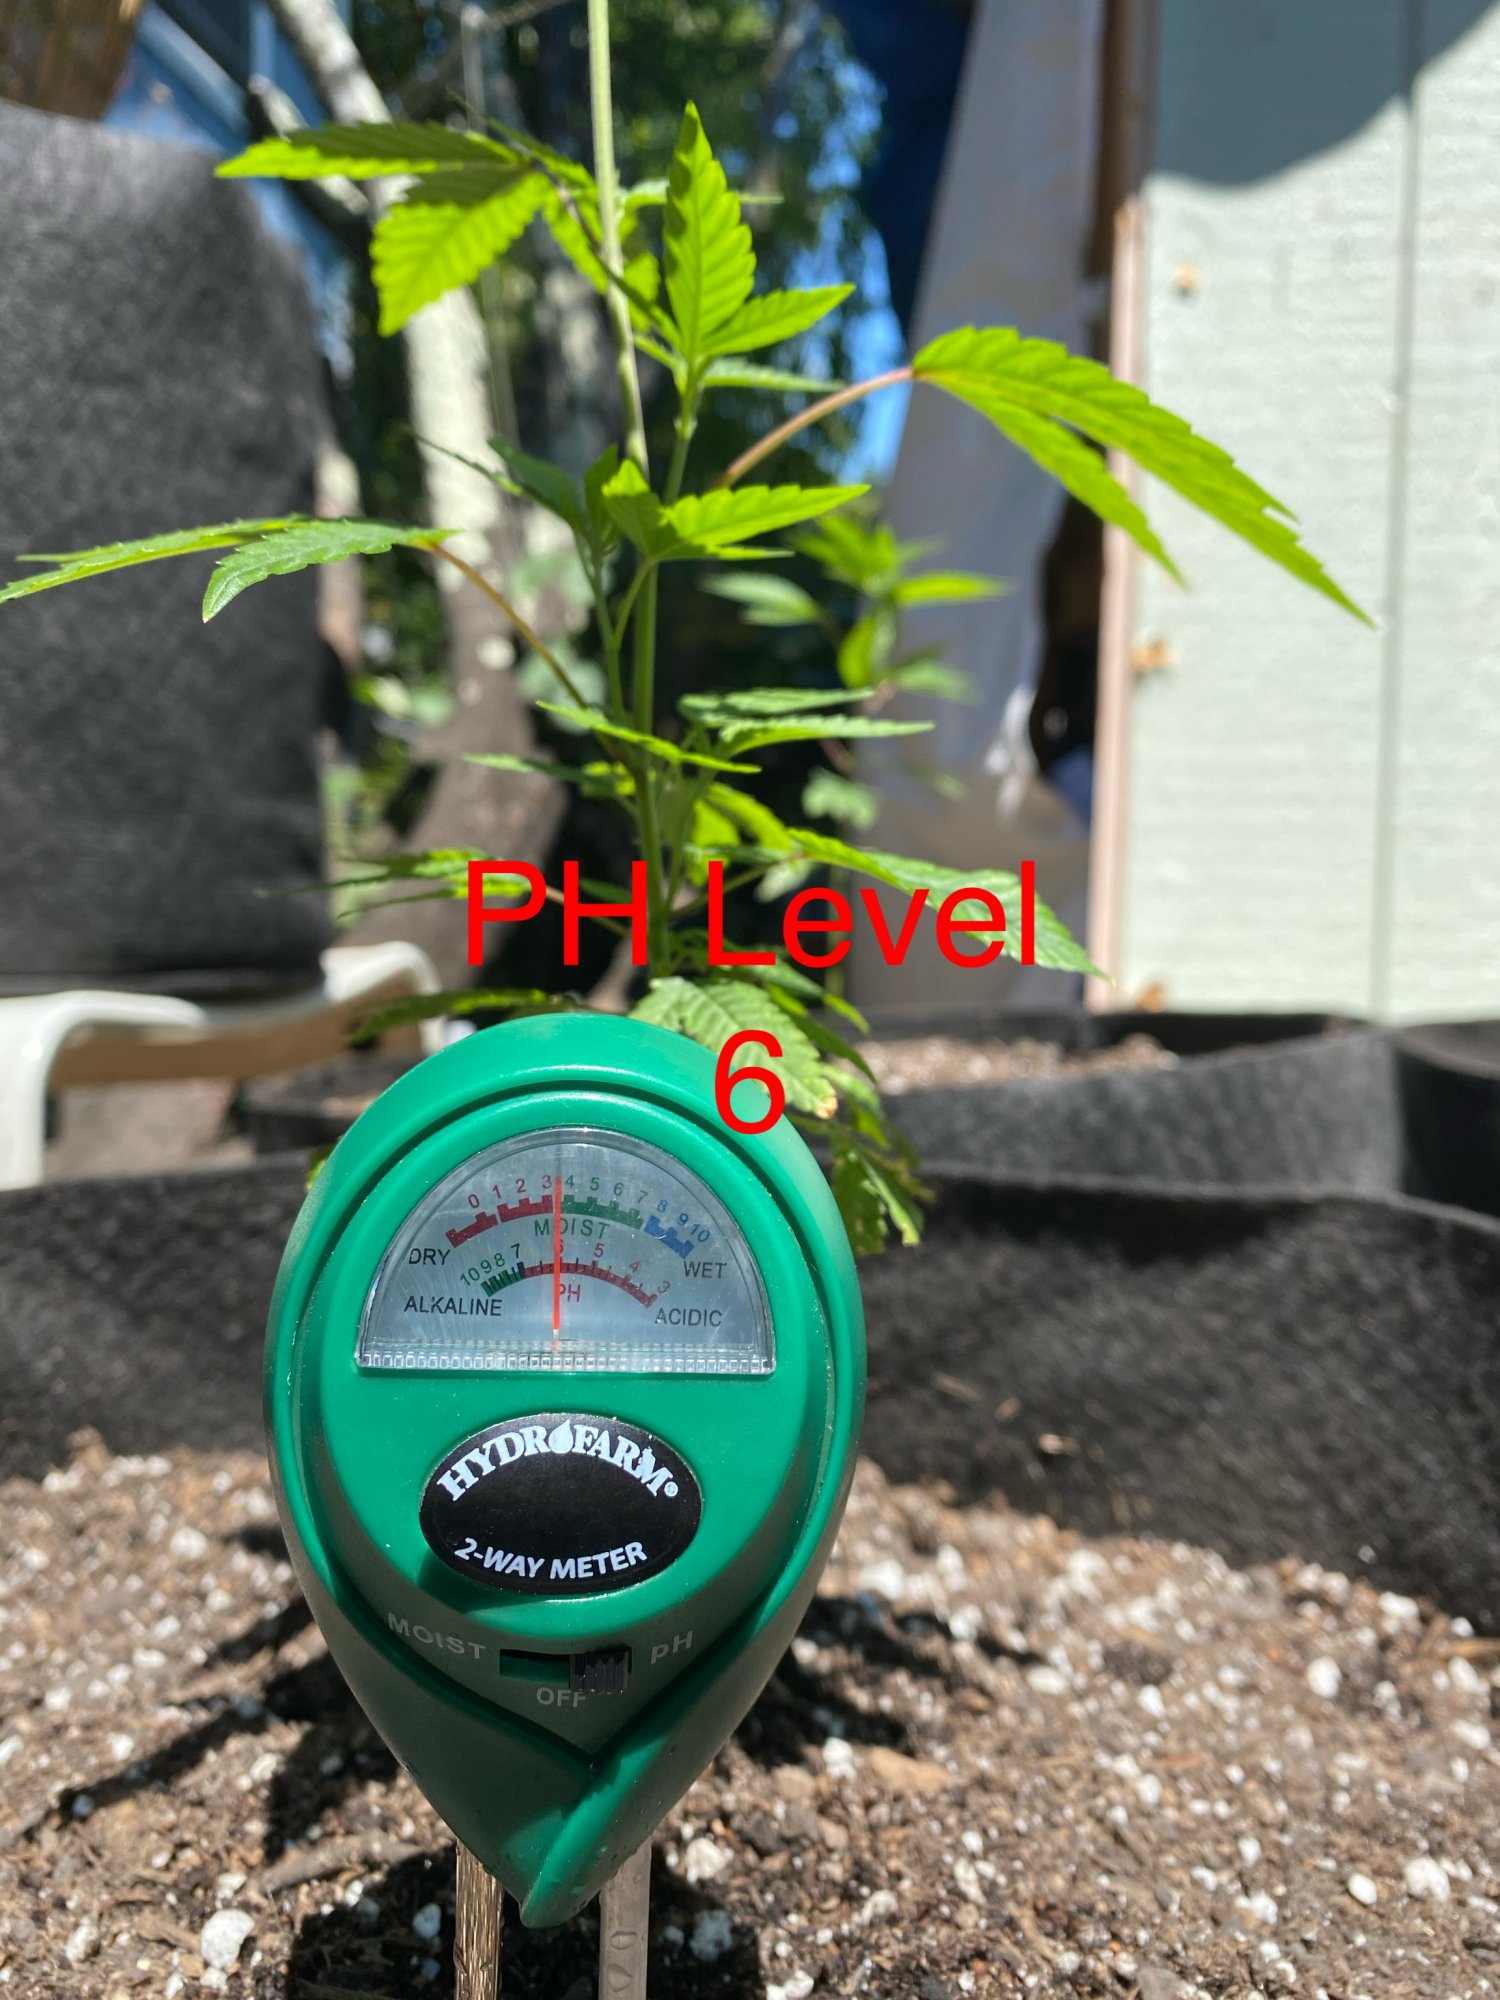 New outdoor grower looking for advice 2